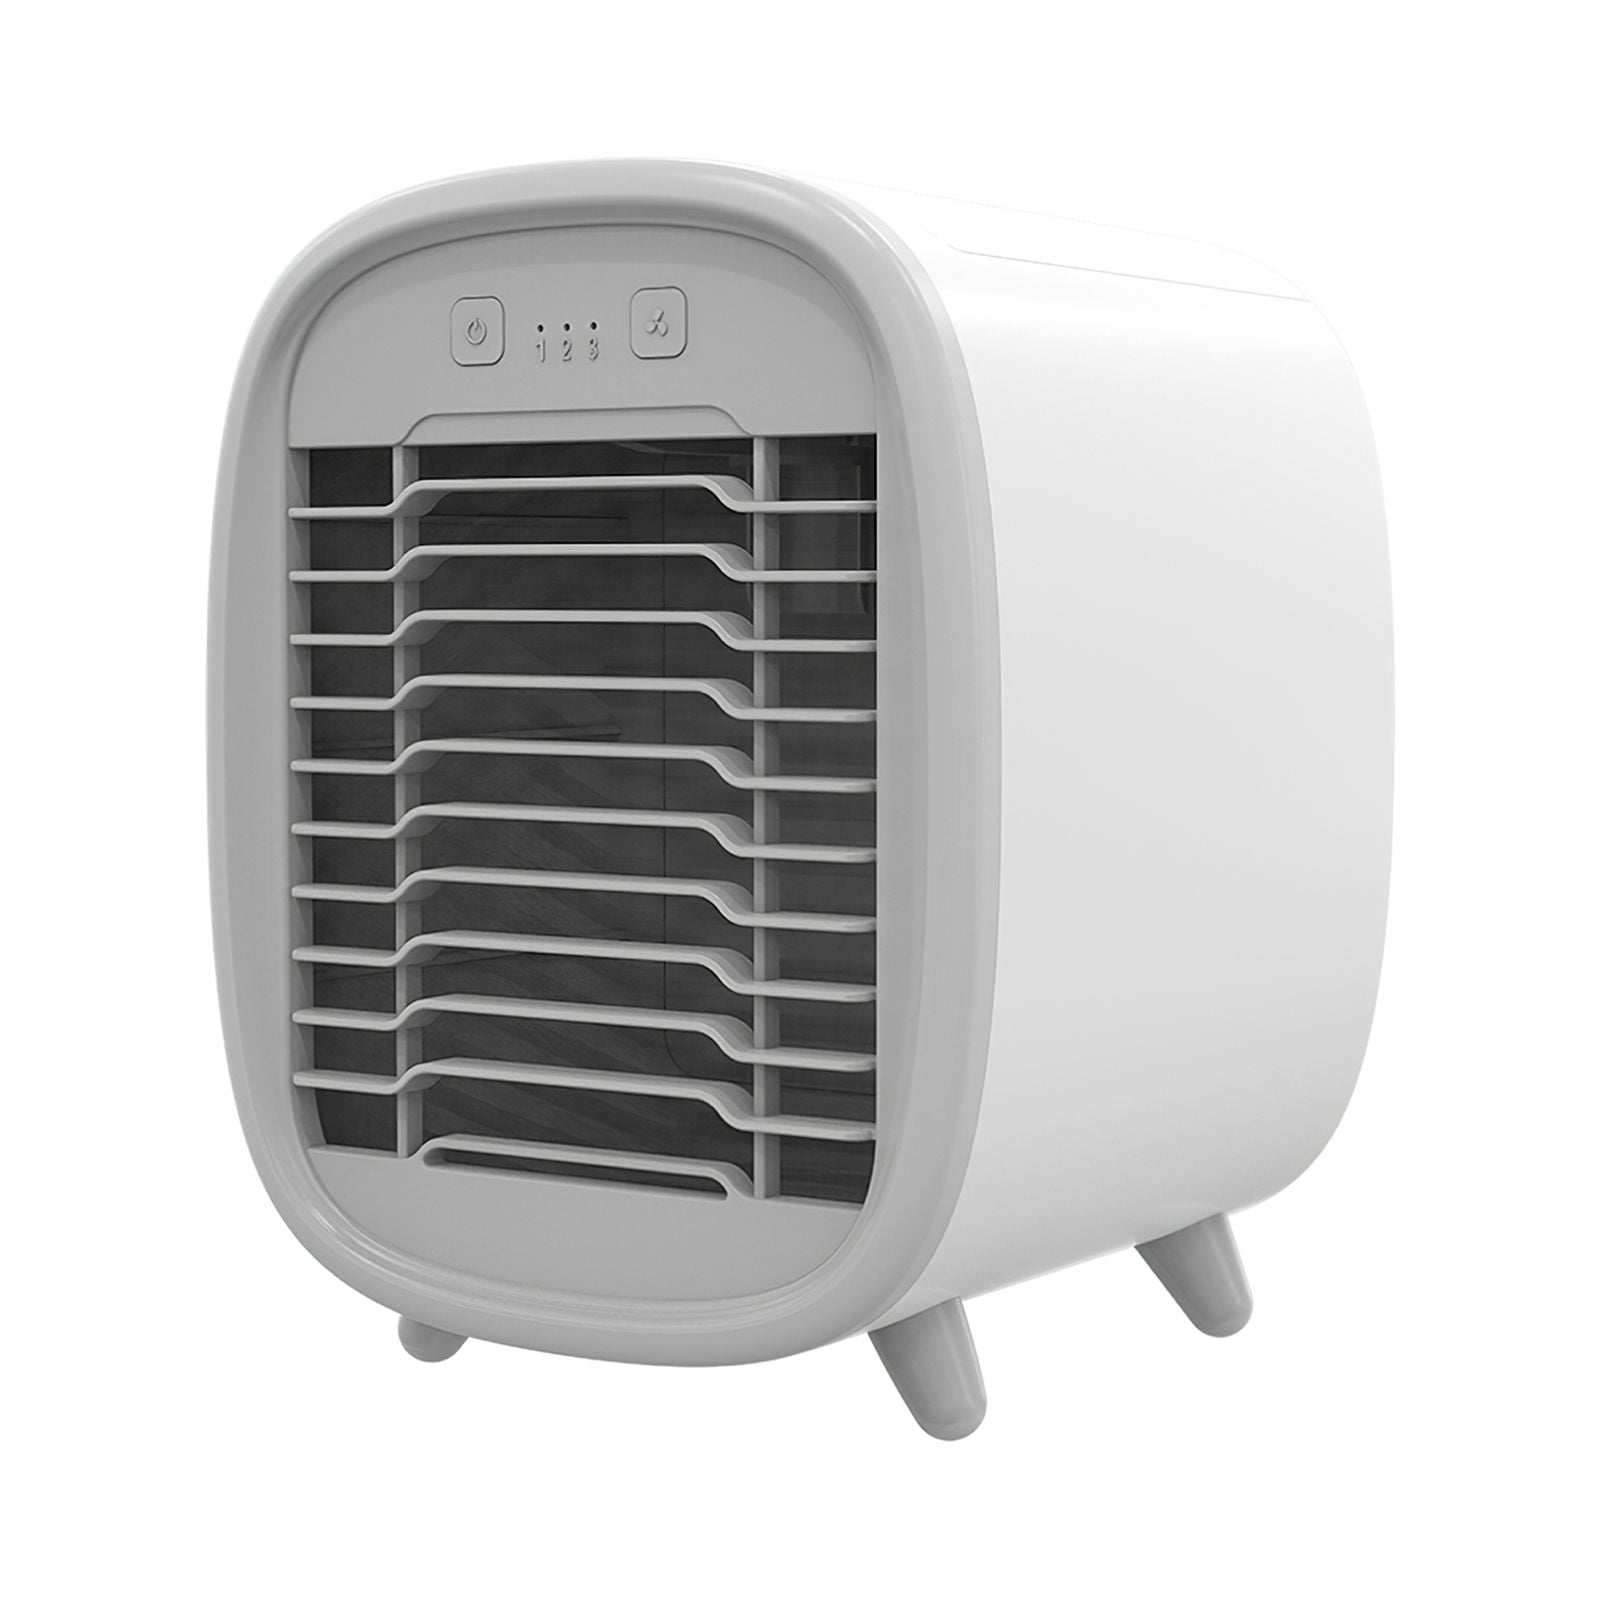 ABS Air Cooler with 5 Fan Blades Quiet 40db Water Cooling Fan 3 Wind Gears Air Conditioner Portable Humidifier Fan for Rooms Offices Bedrooms - Walmart.com